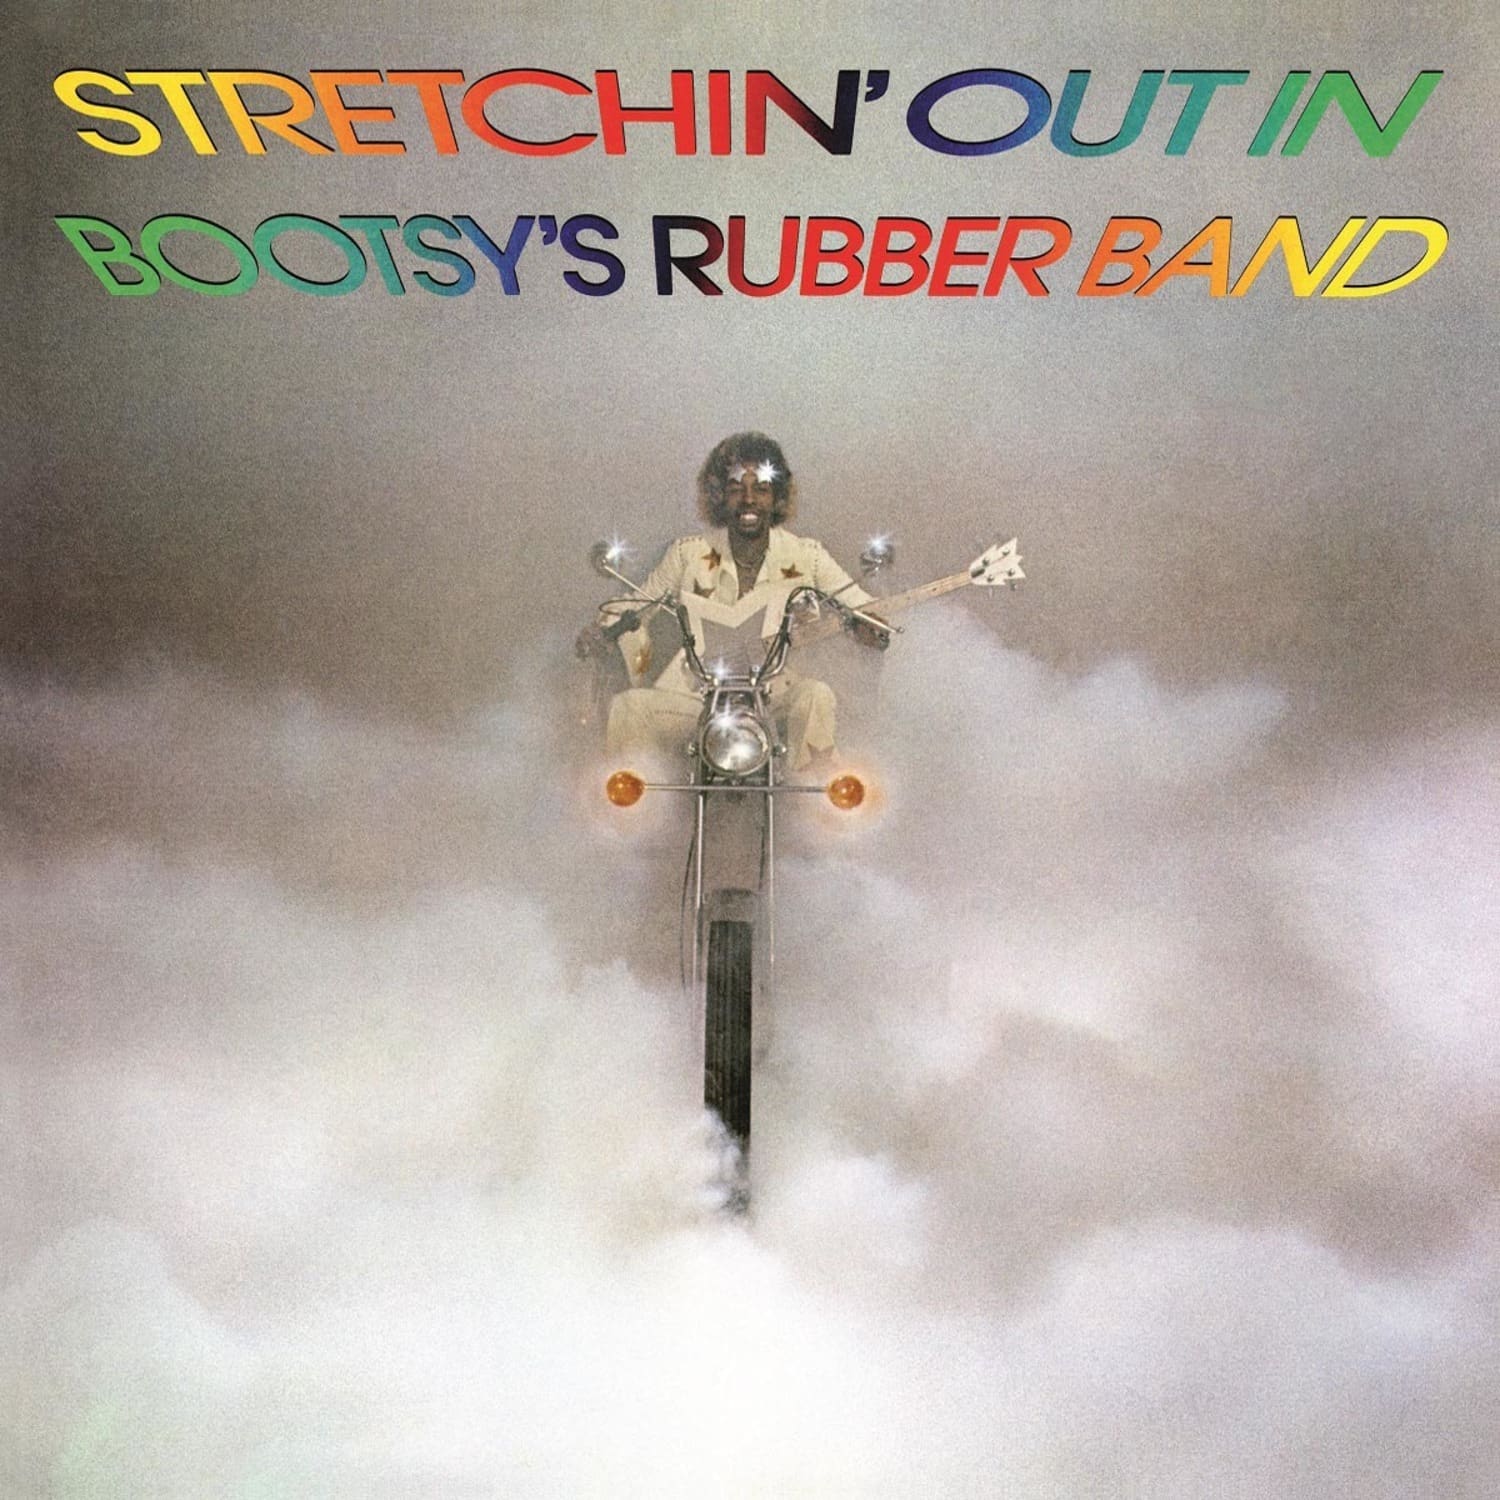 Bootsy s Rubber Band - STRETCHIN OUT IN BOOTSY S RUBBER BAND 